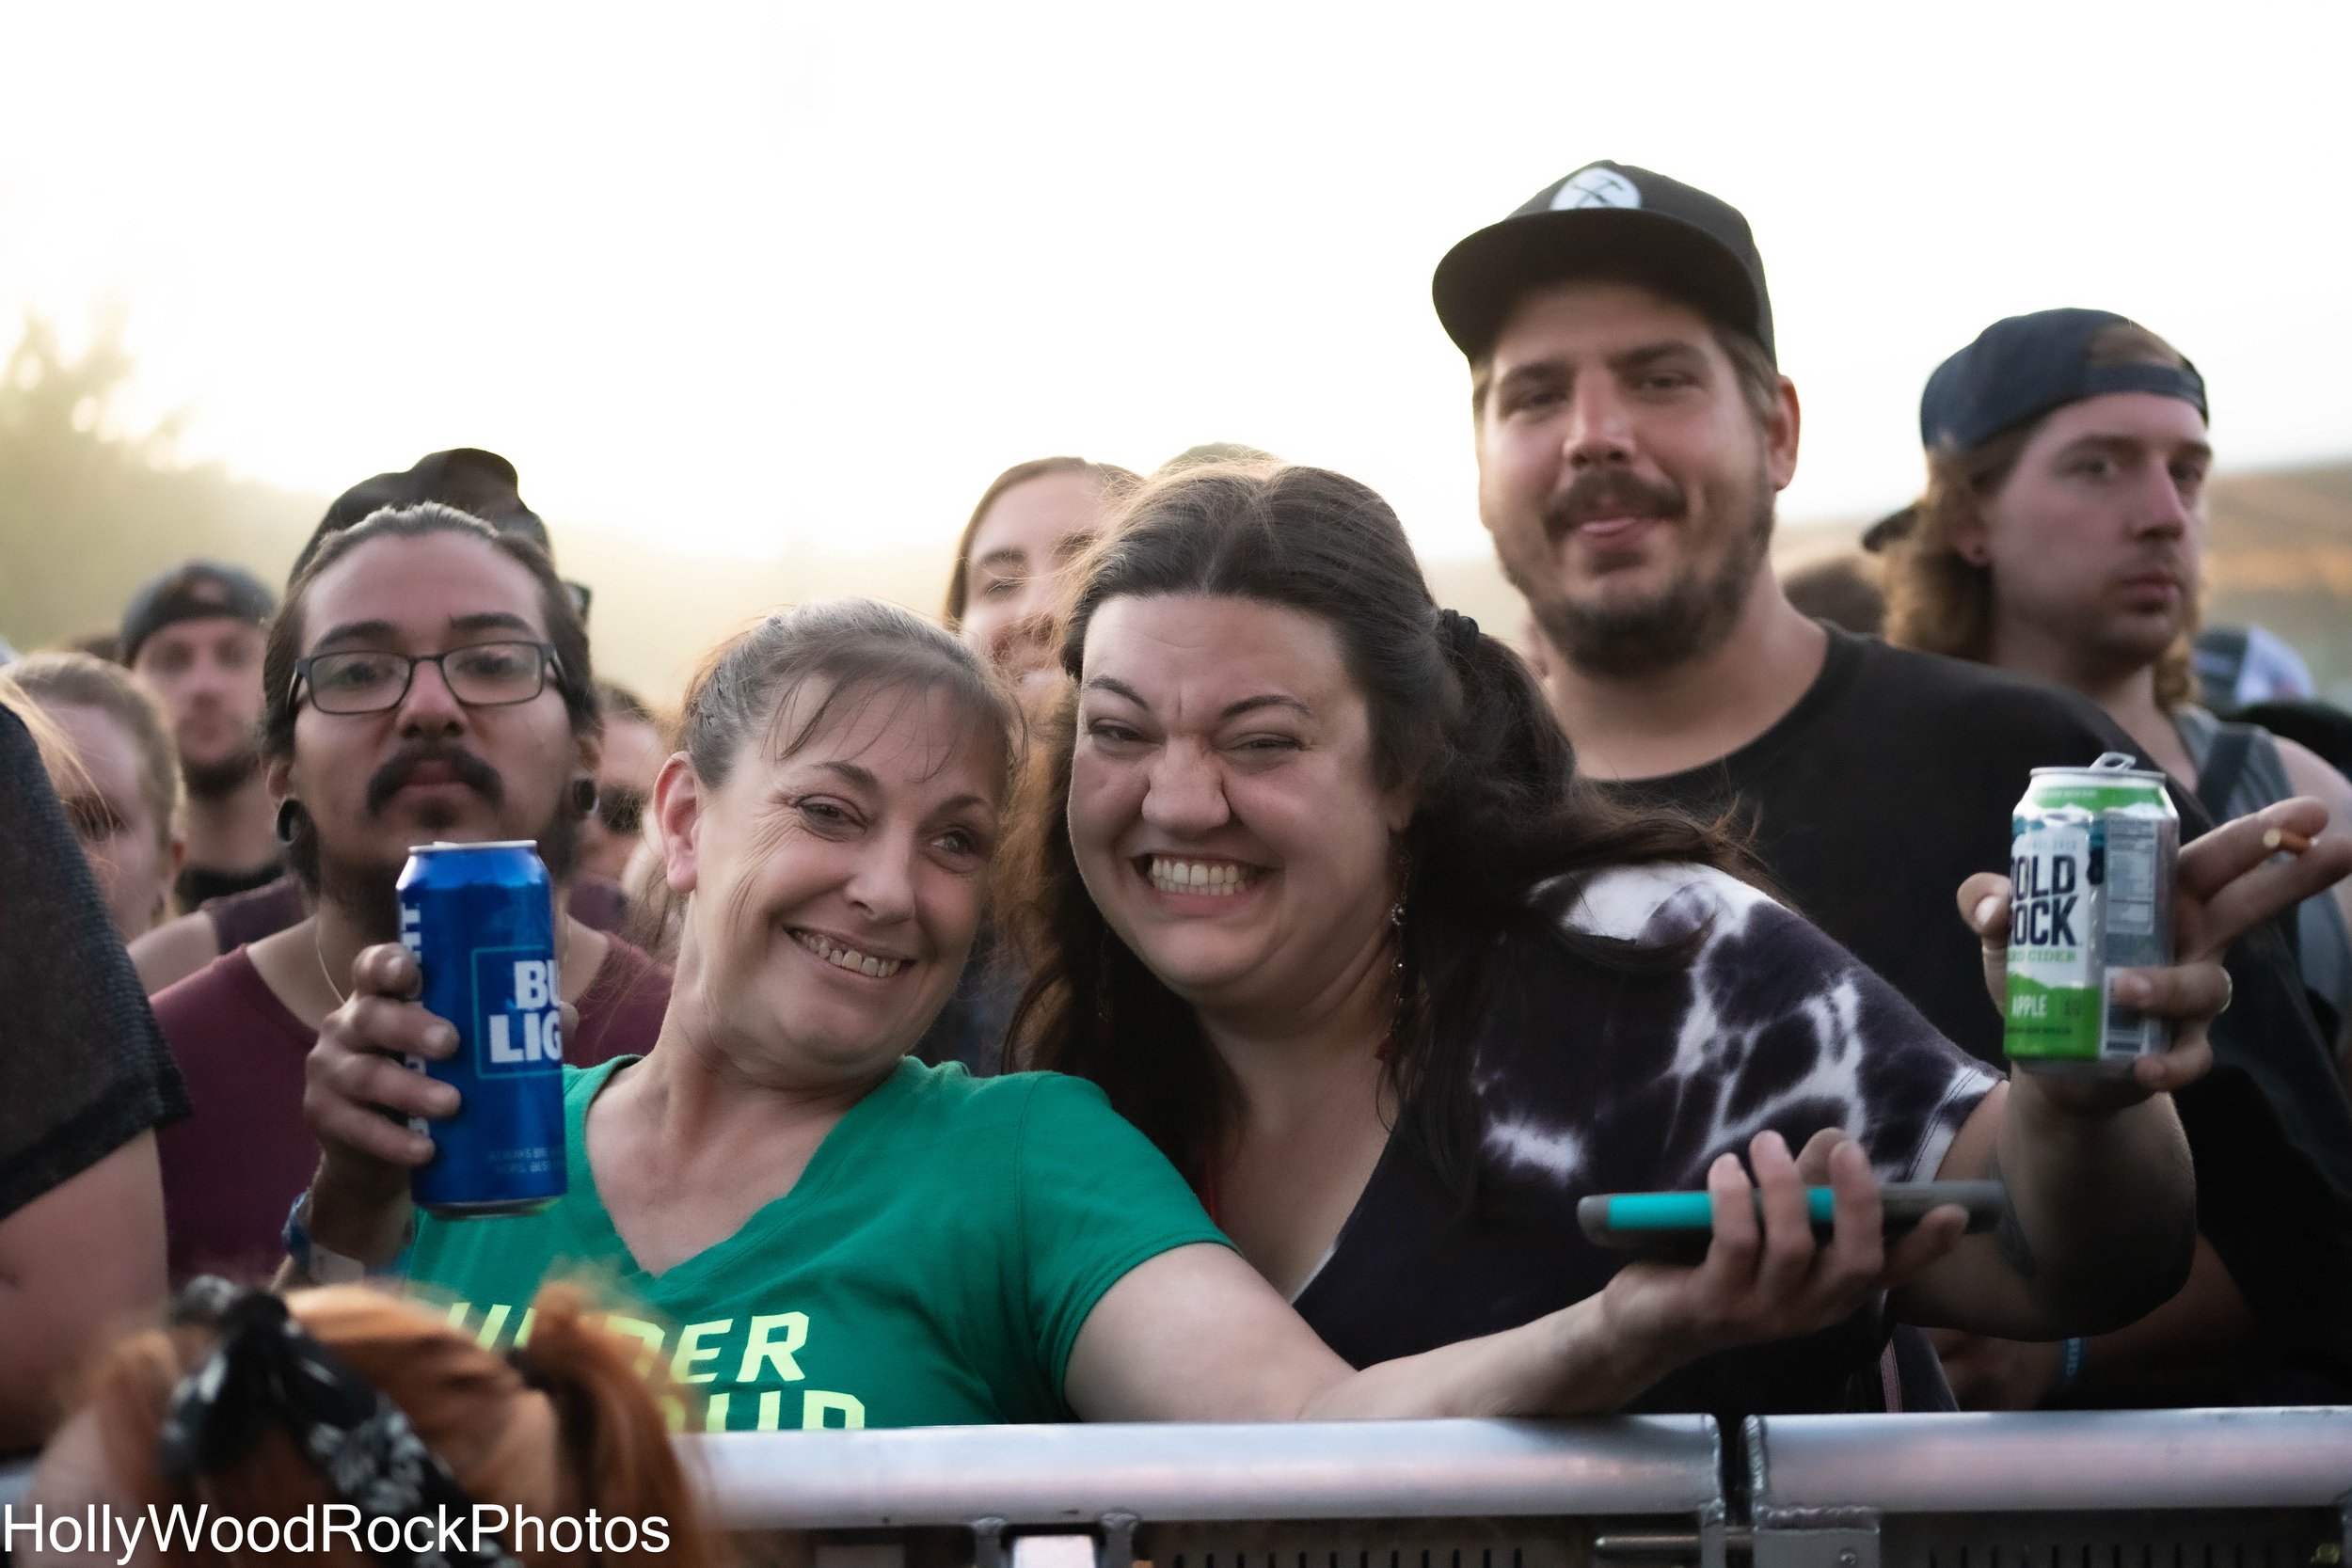 Some Fans Pose for a Photo at Blue Ridge Rock Festival by Holly Williams